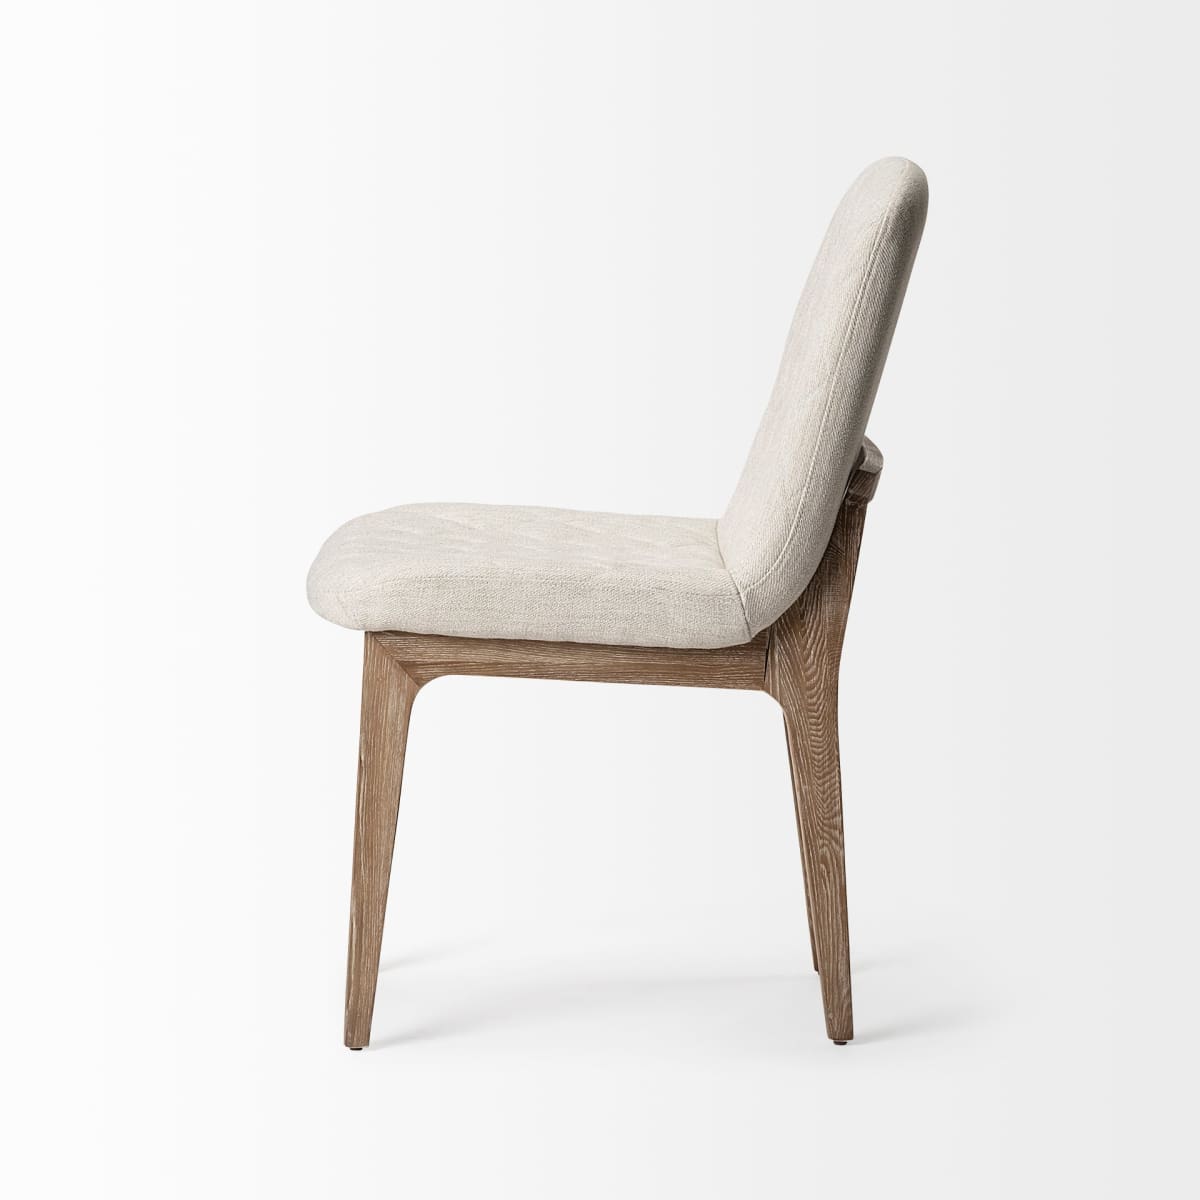 David Dining Chair Cream Fabric | Brown Wood - dining-chairs